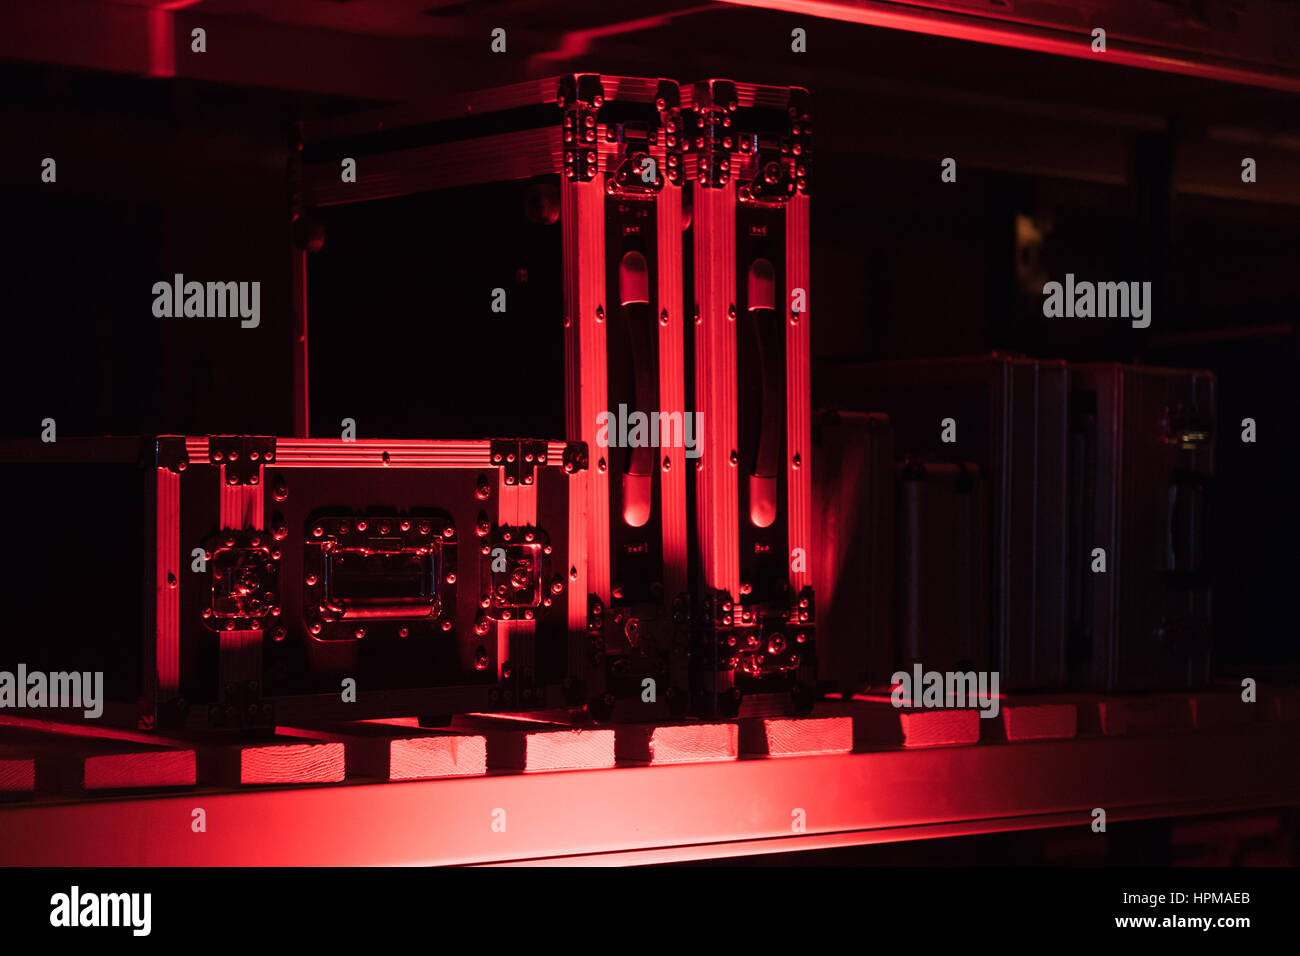 Flight cases for audio visual equipment in storage, lit by event-style uplighting Stock Photo